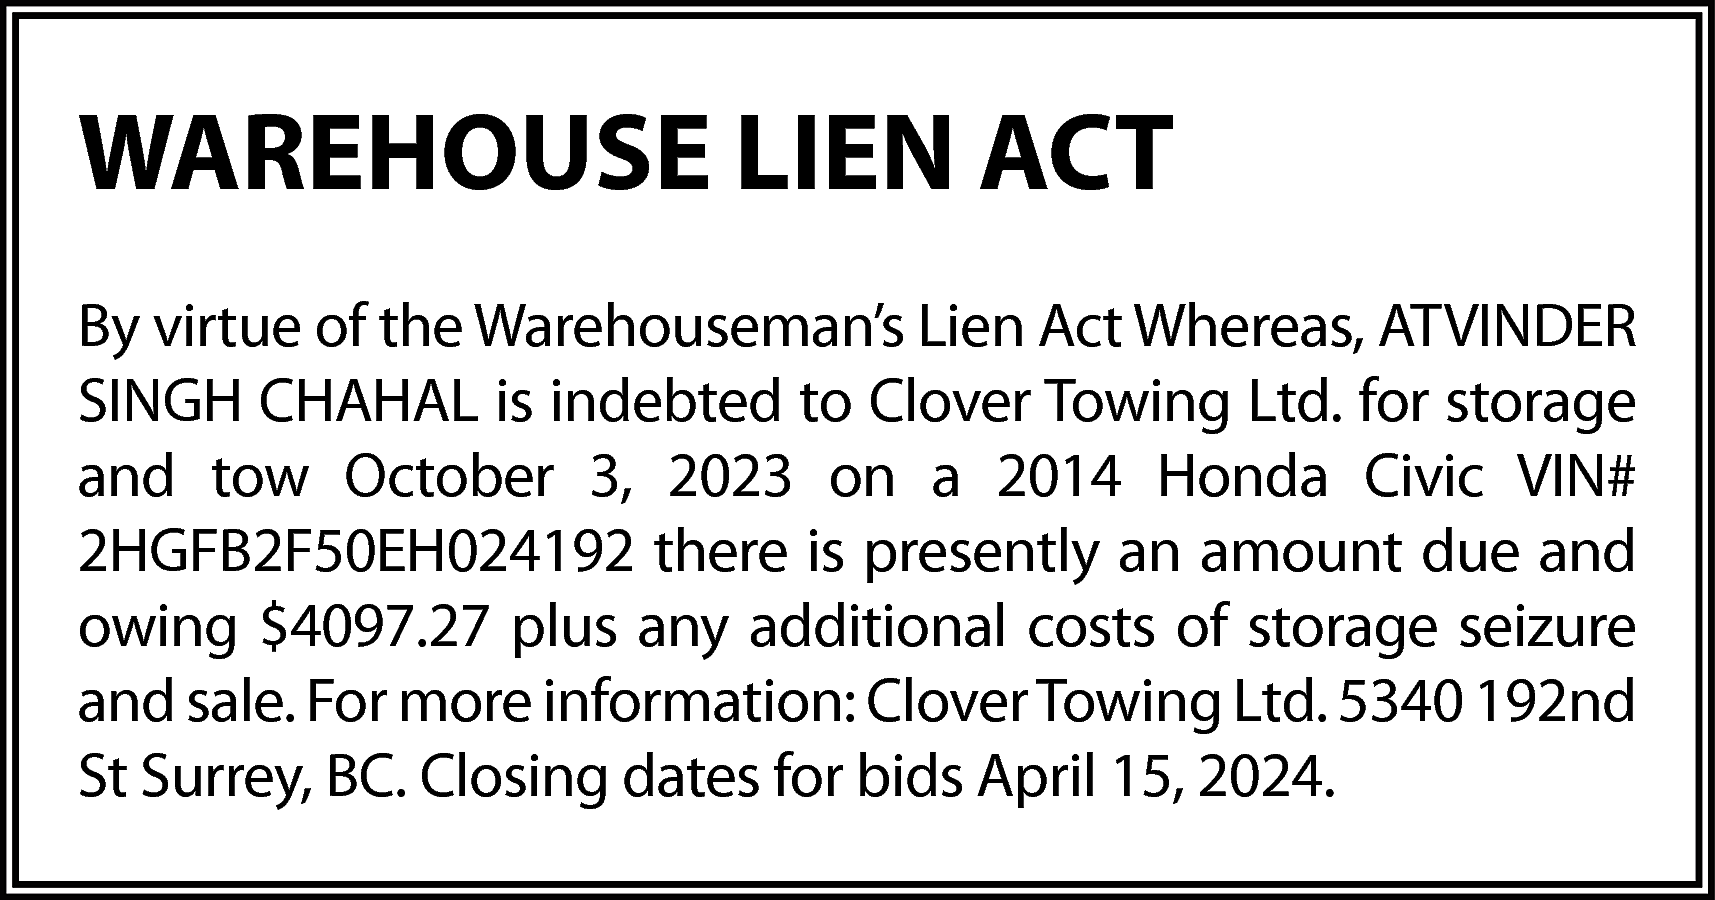 WAREHOUSE LIEN ACT <br>By virtue  WAREHOUSE LIEN ACT  By virtue of the Warehouseman’s Lien Act Whereas, ATVINDER  SINGH CHAHAL is indebted to Clover Towing Ltd. for storage  and tow October 3, 2023 on a 2014 Honda Civic VIN#  2HGFB2F50EH024192 there is presently an amount due and  owing $4097.27 plus any additional costs of storage seizure  and sale. For more information: Clover Towing Ltd. 5340 192nd  St Surrey, BC. Closing dates for bids April 15, 2024.    